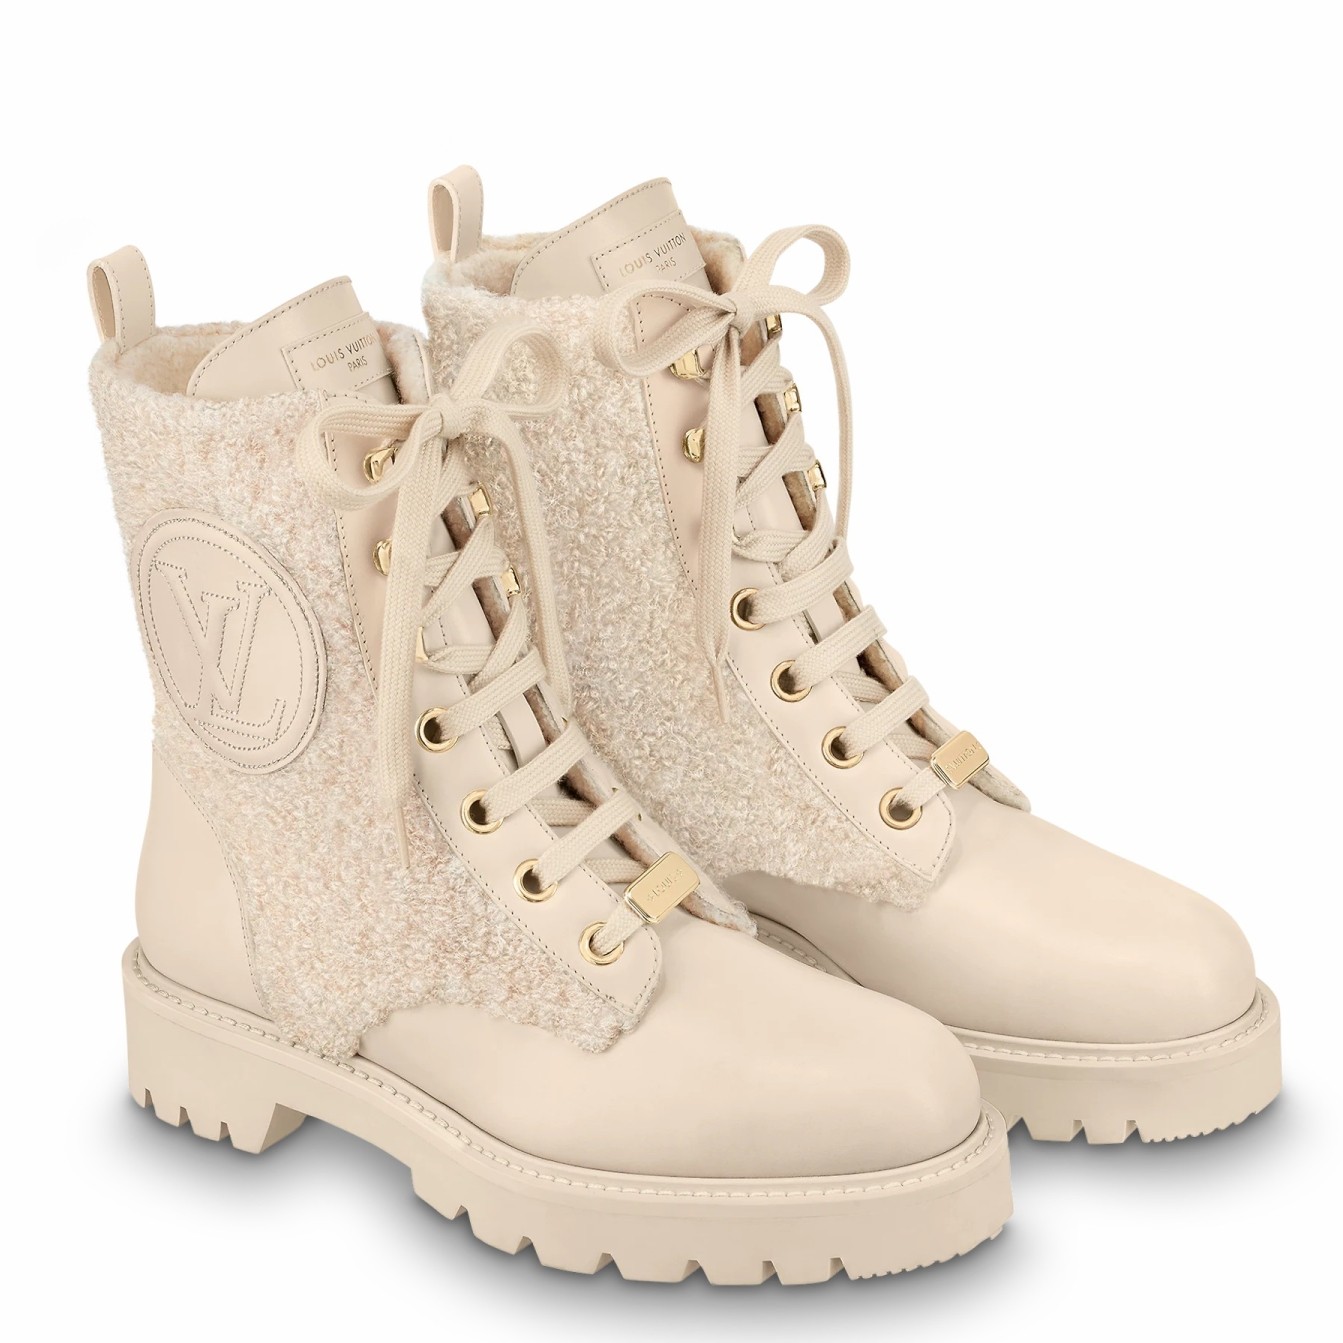 Replica Louis Vuitton Territory Flat Ranger Boots In Cream Leather with Wool